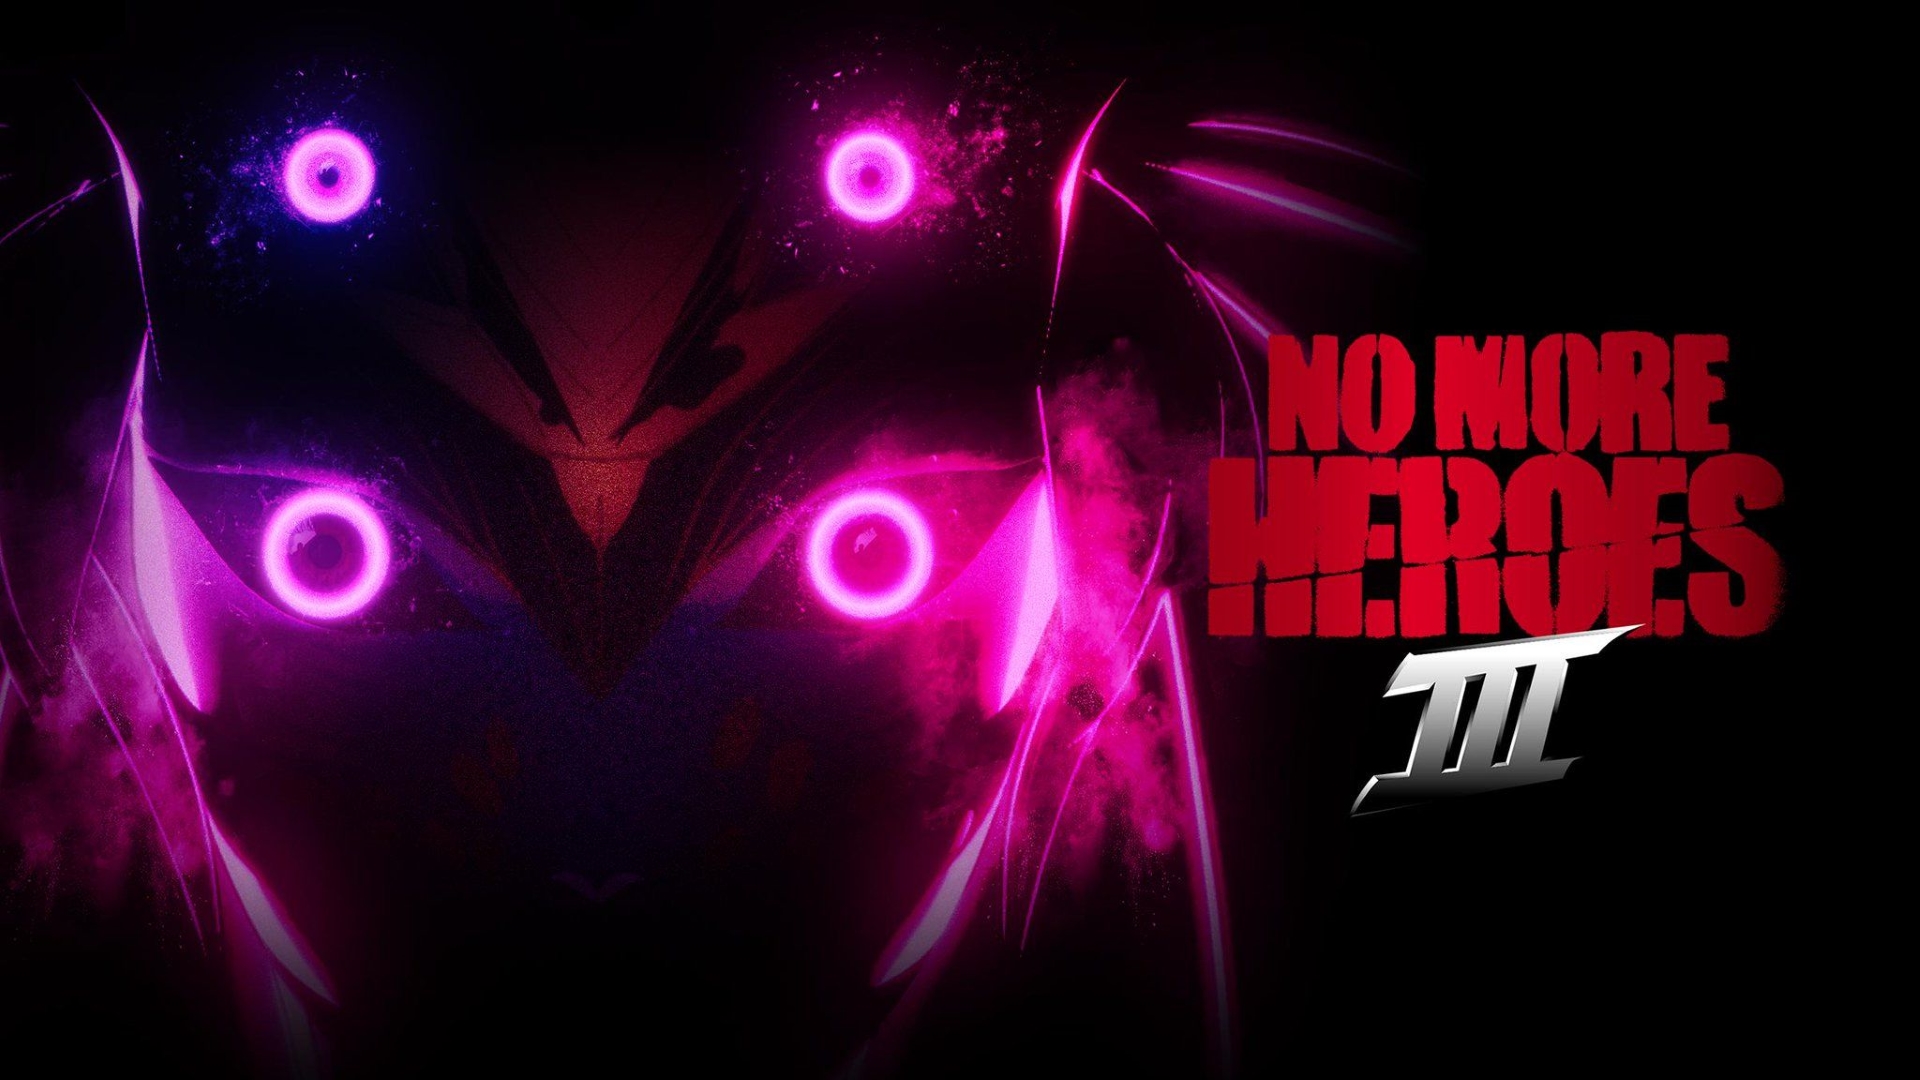 No More Heroes 3 Wallpapers 5